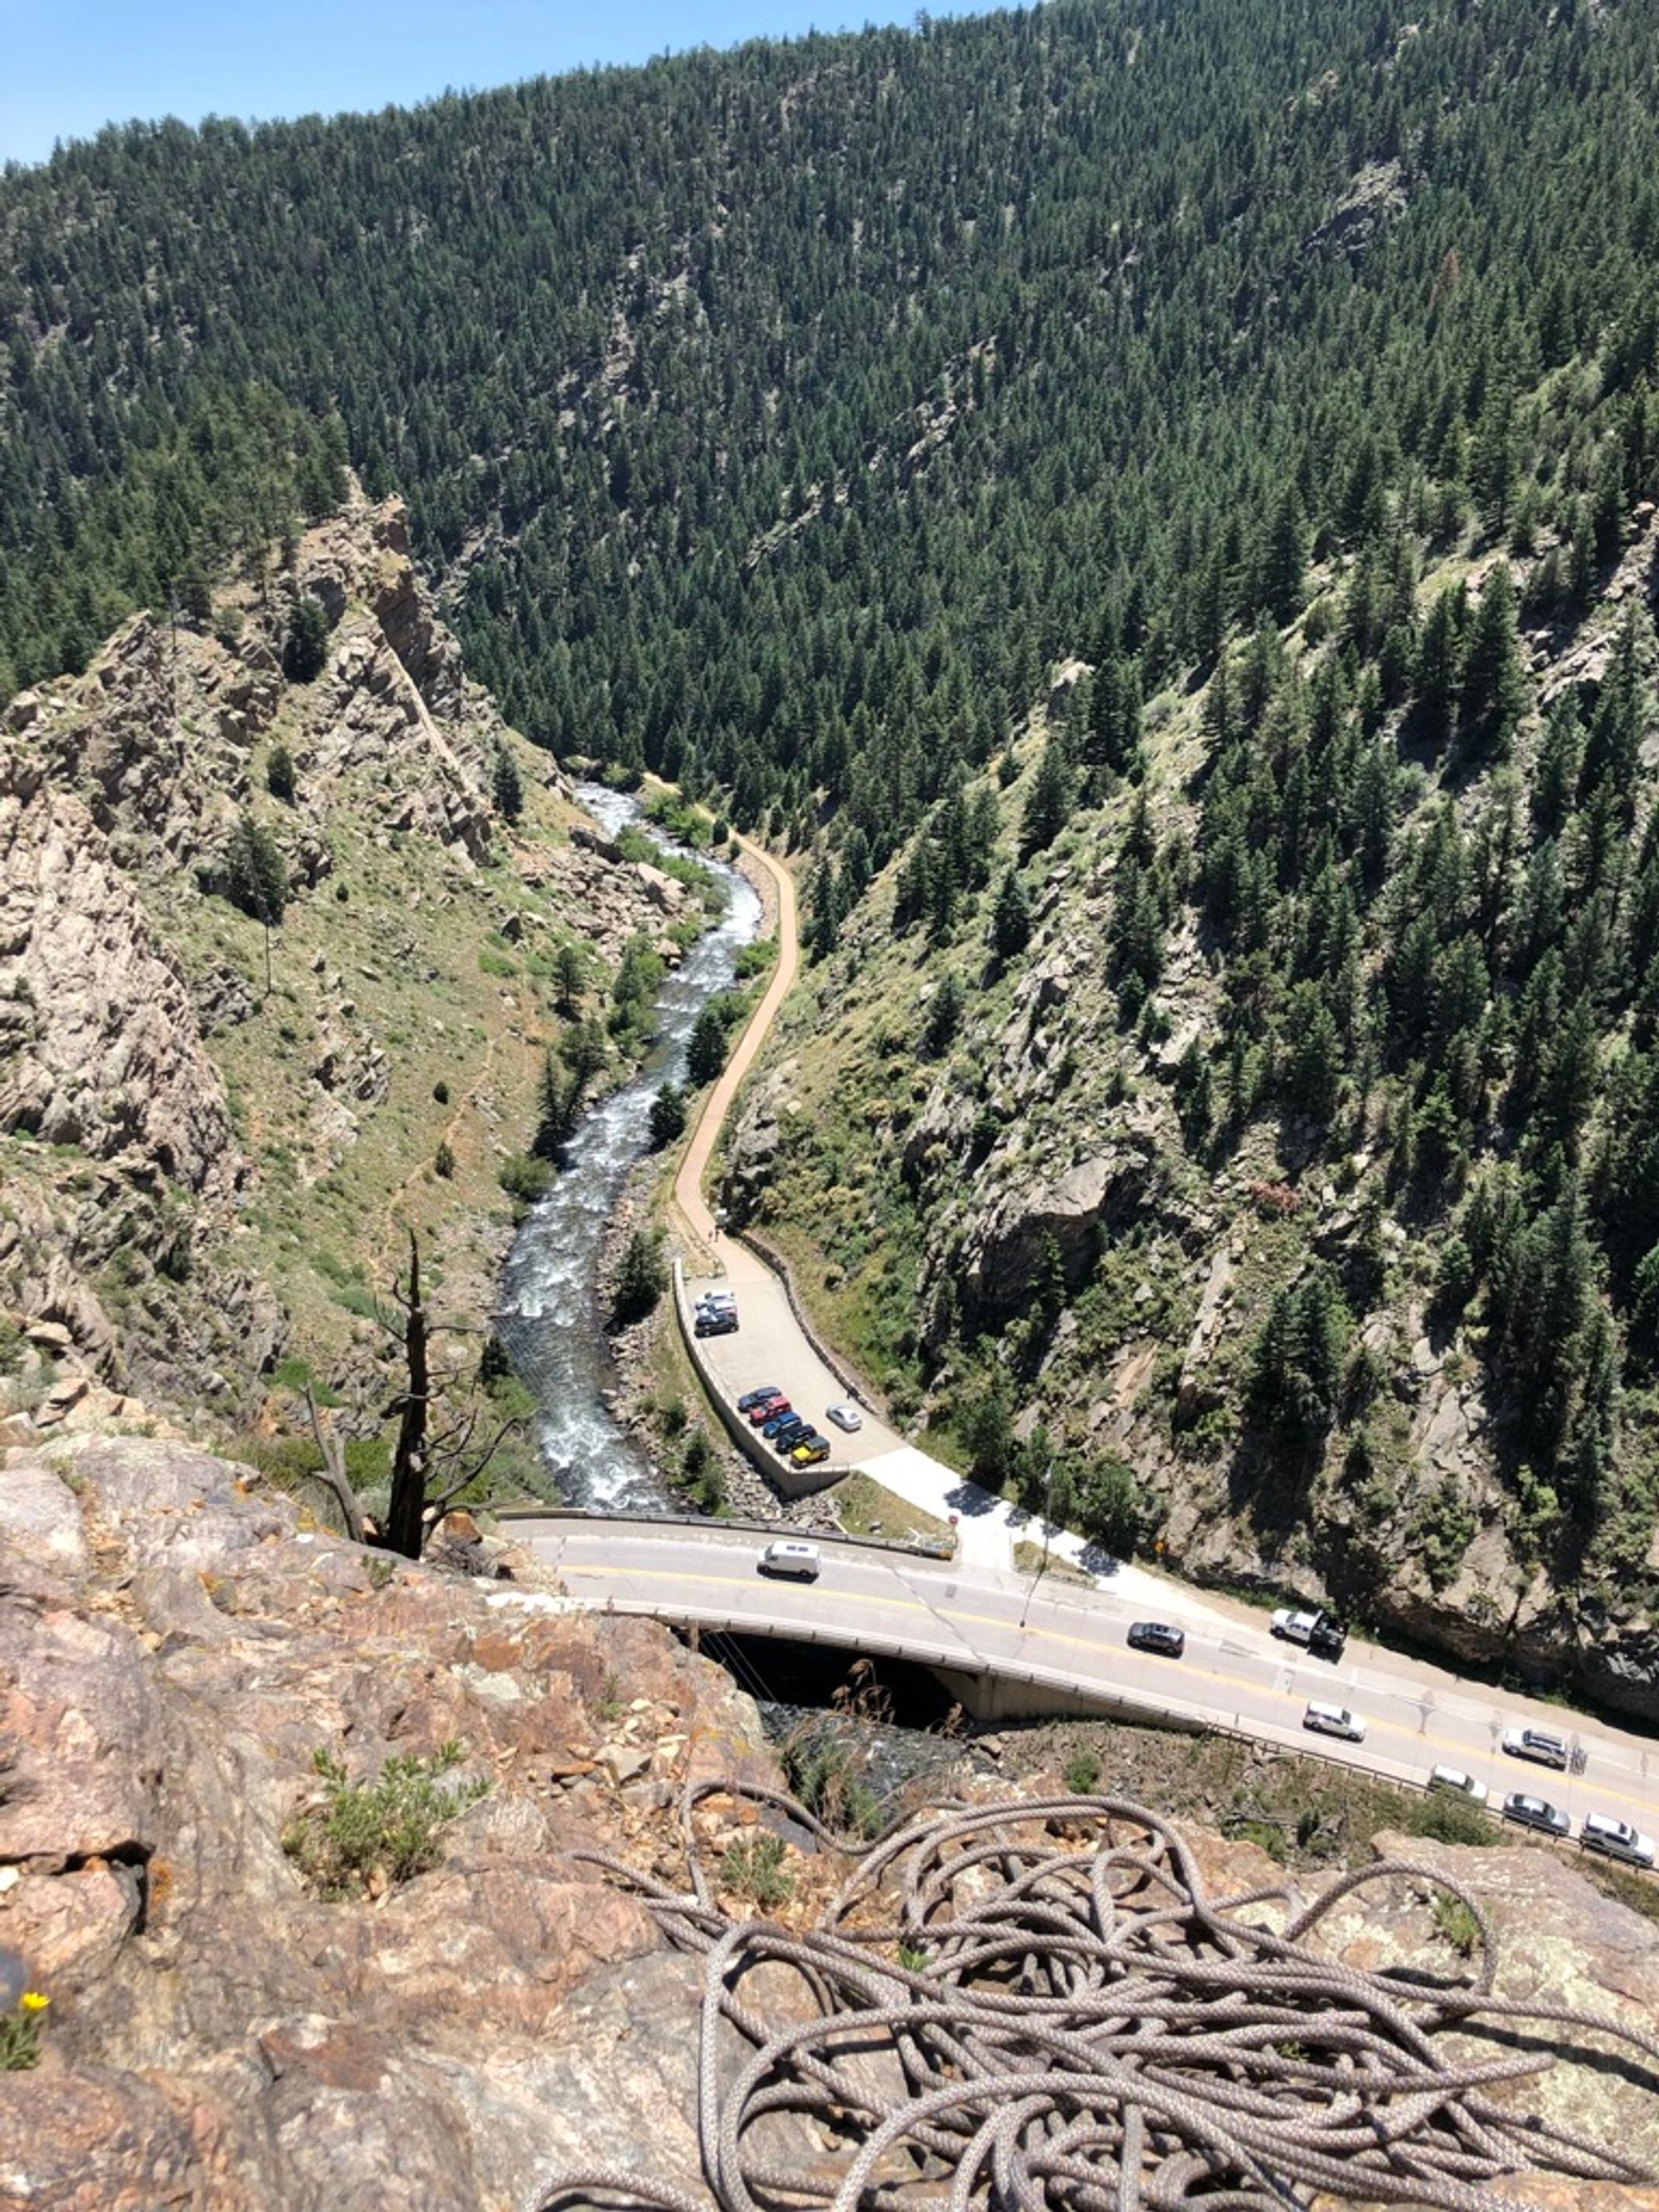 The view from ~100ft up, overlooking Clear Creek, Rt 6, and the Tunnel 5 parking lot.